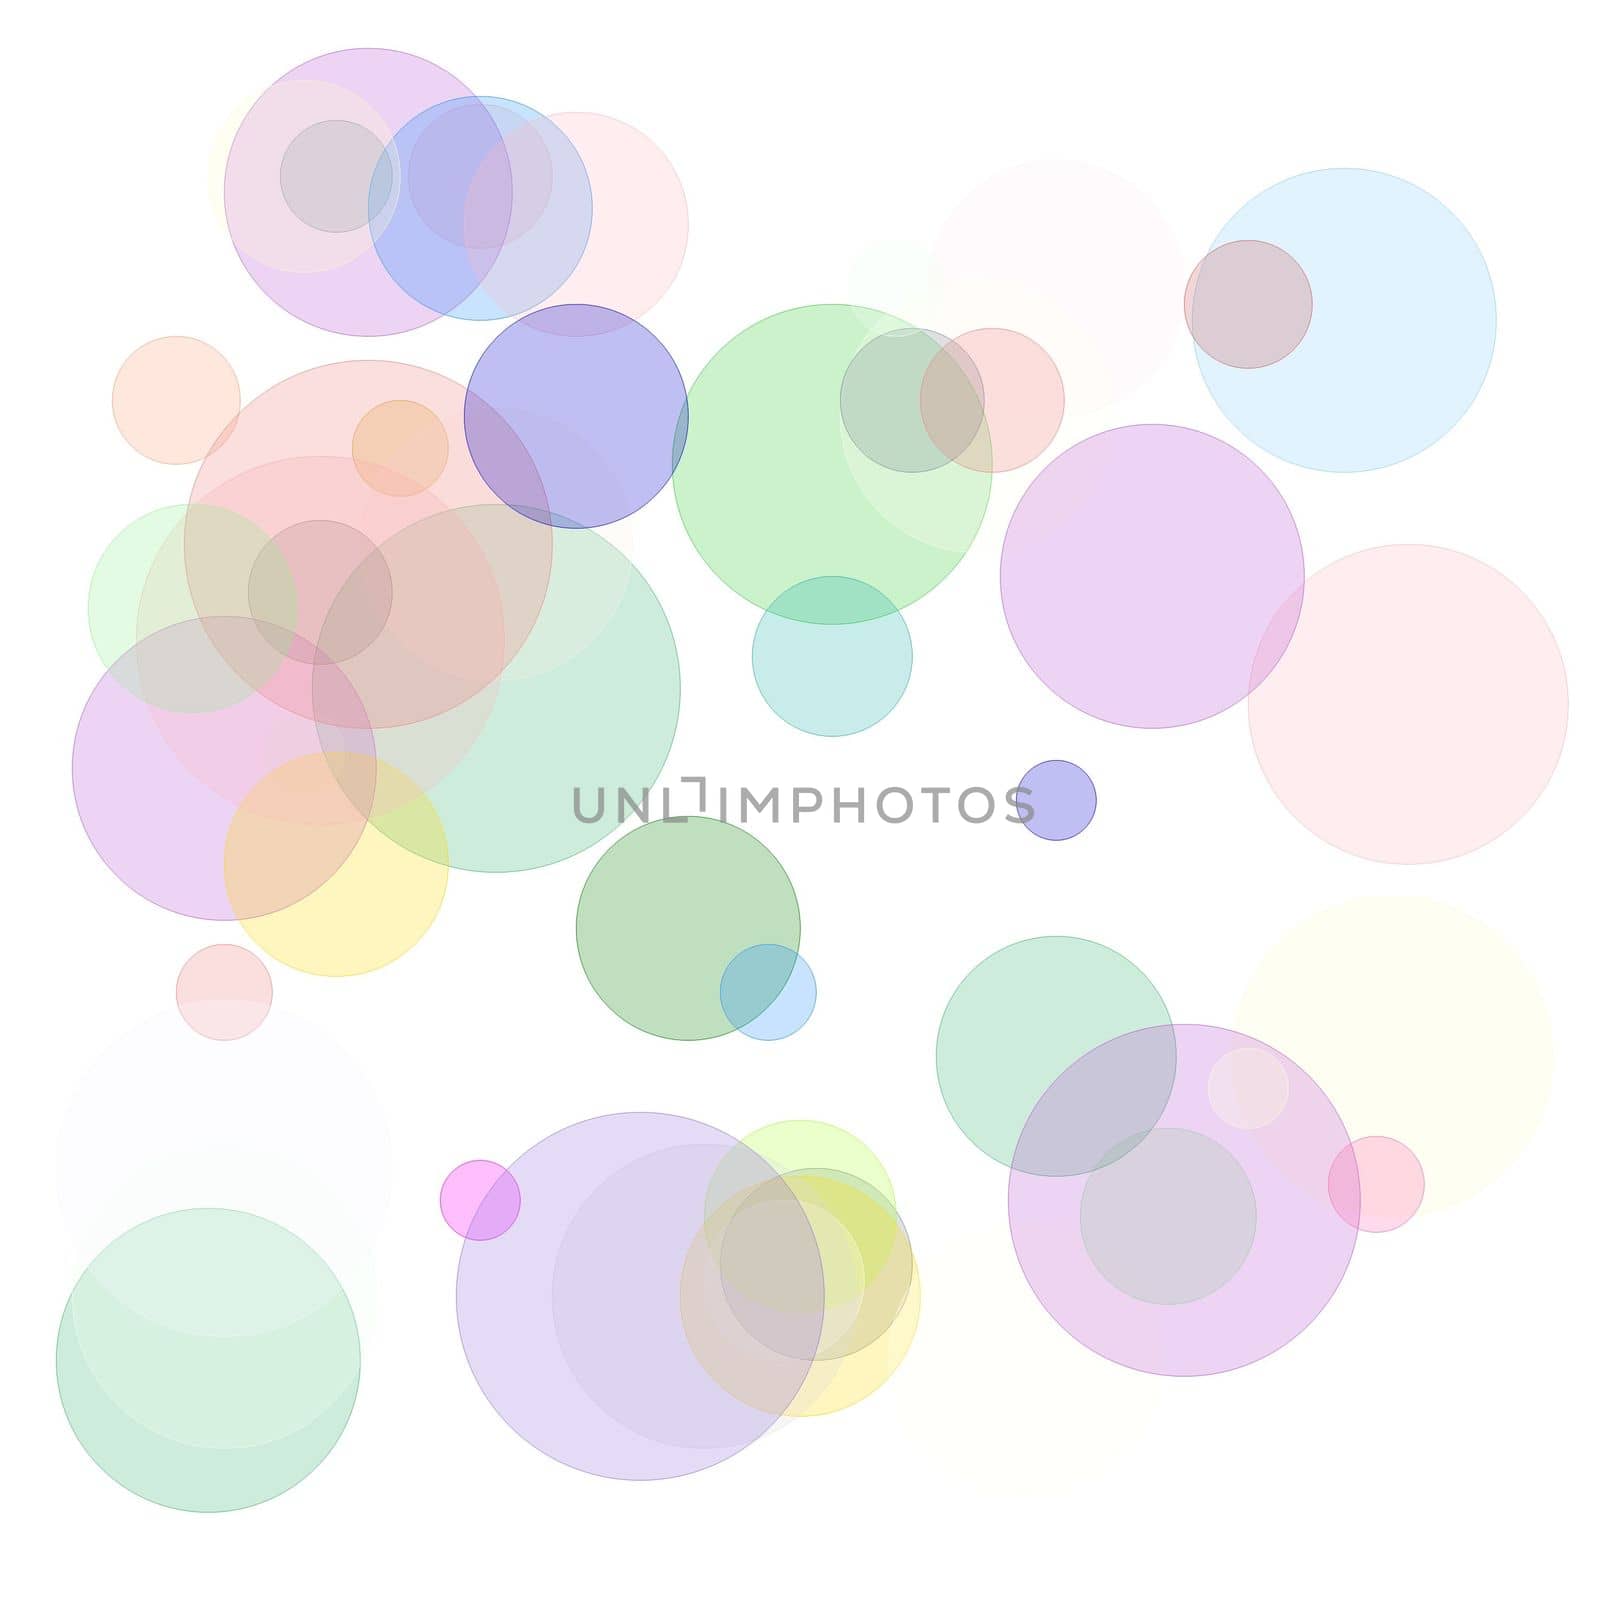 Abstract minimalist blue pink grey white yellow green red violet brown illustration with circles and white background